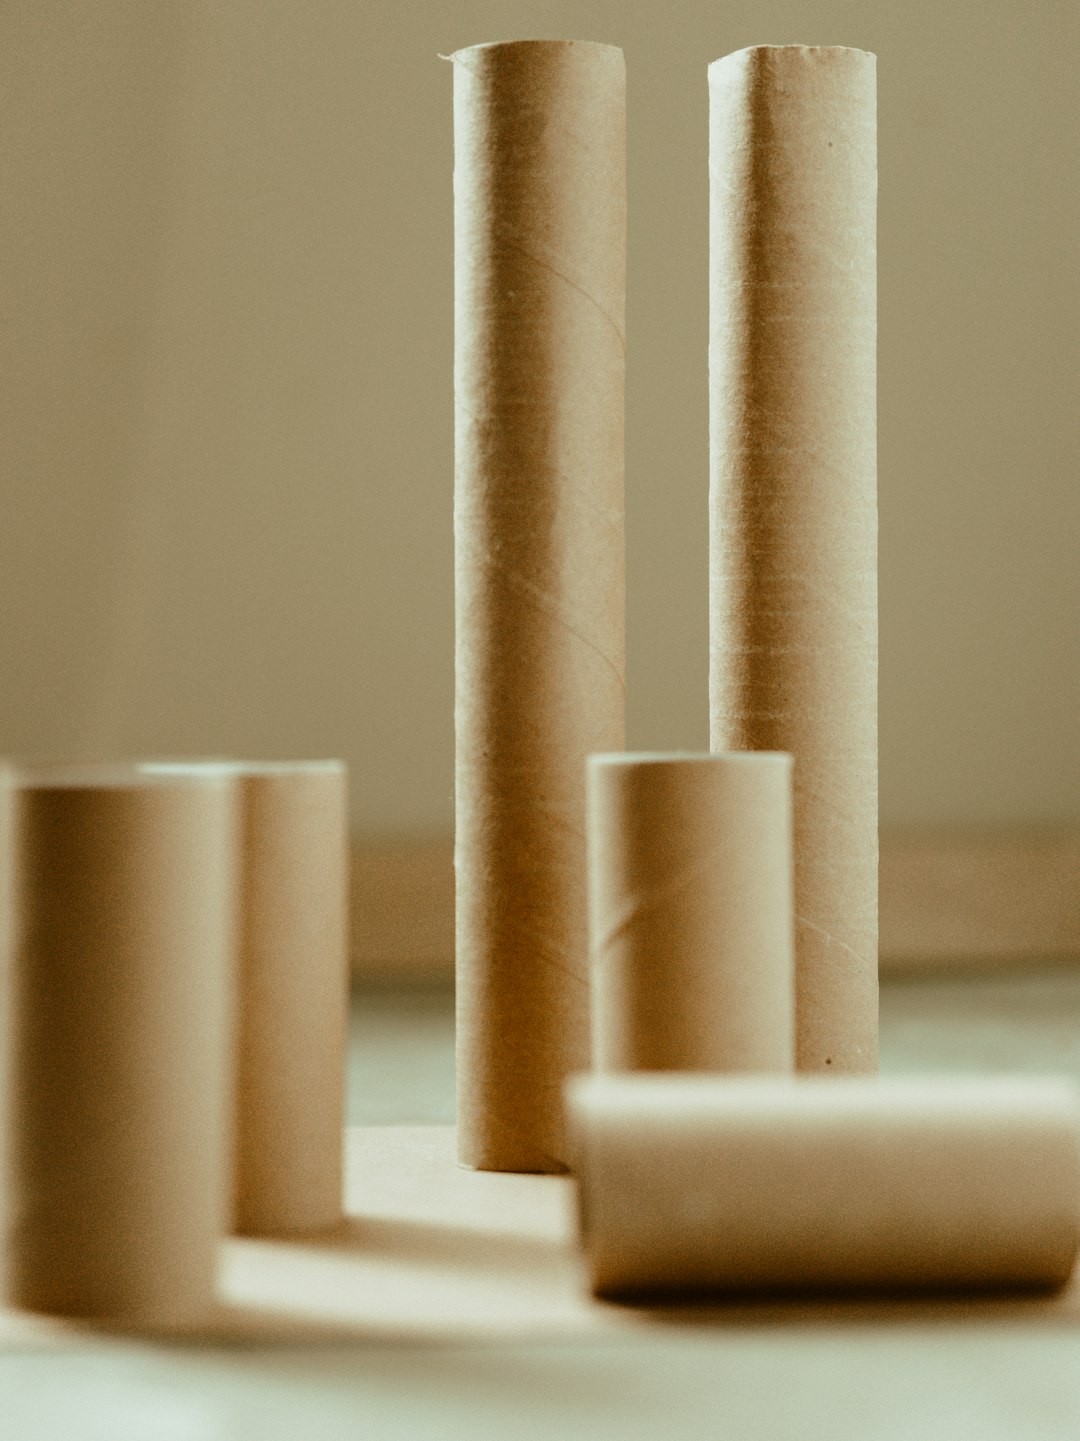 A collection of empty cardboard paper towel rolls and toilet paper rolls.